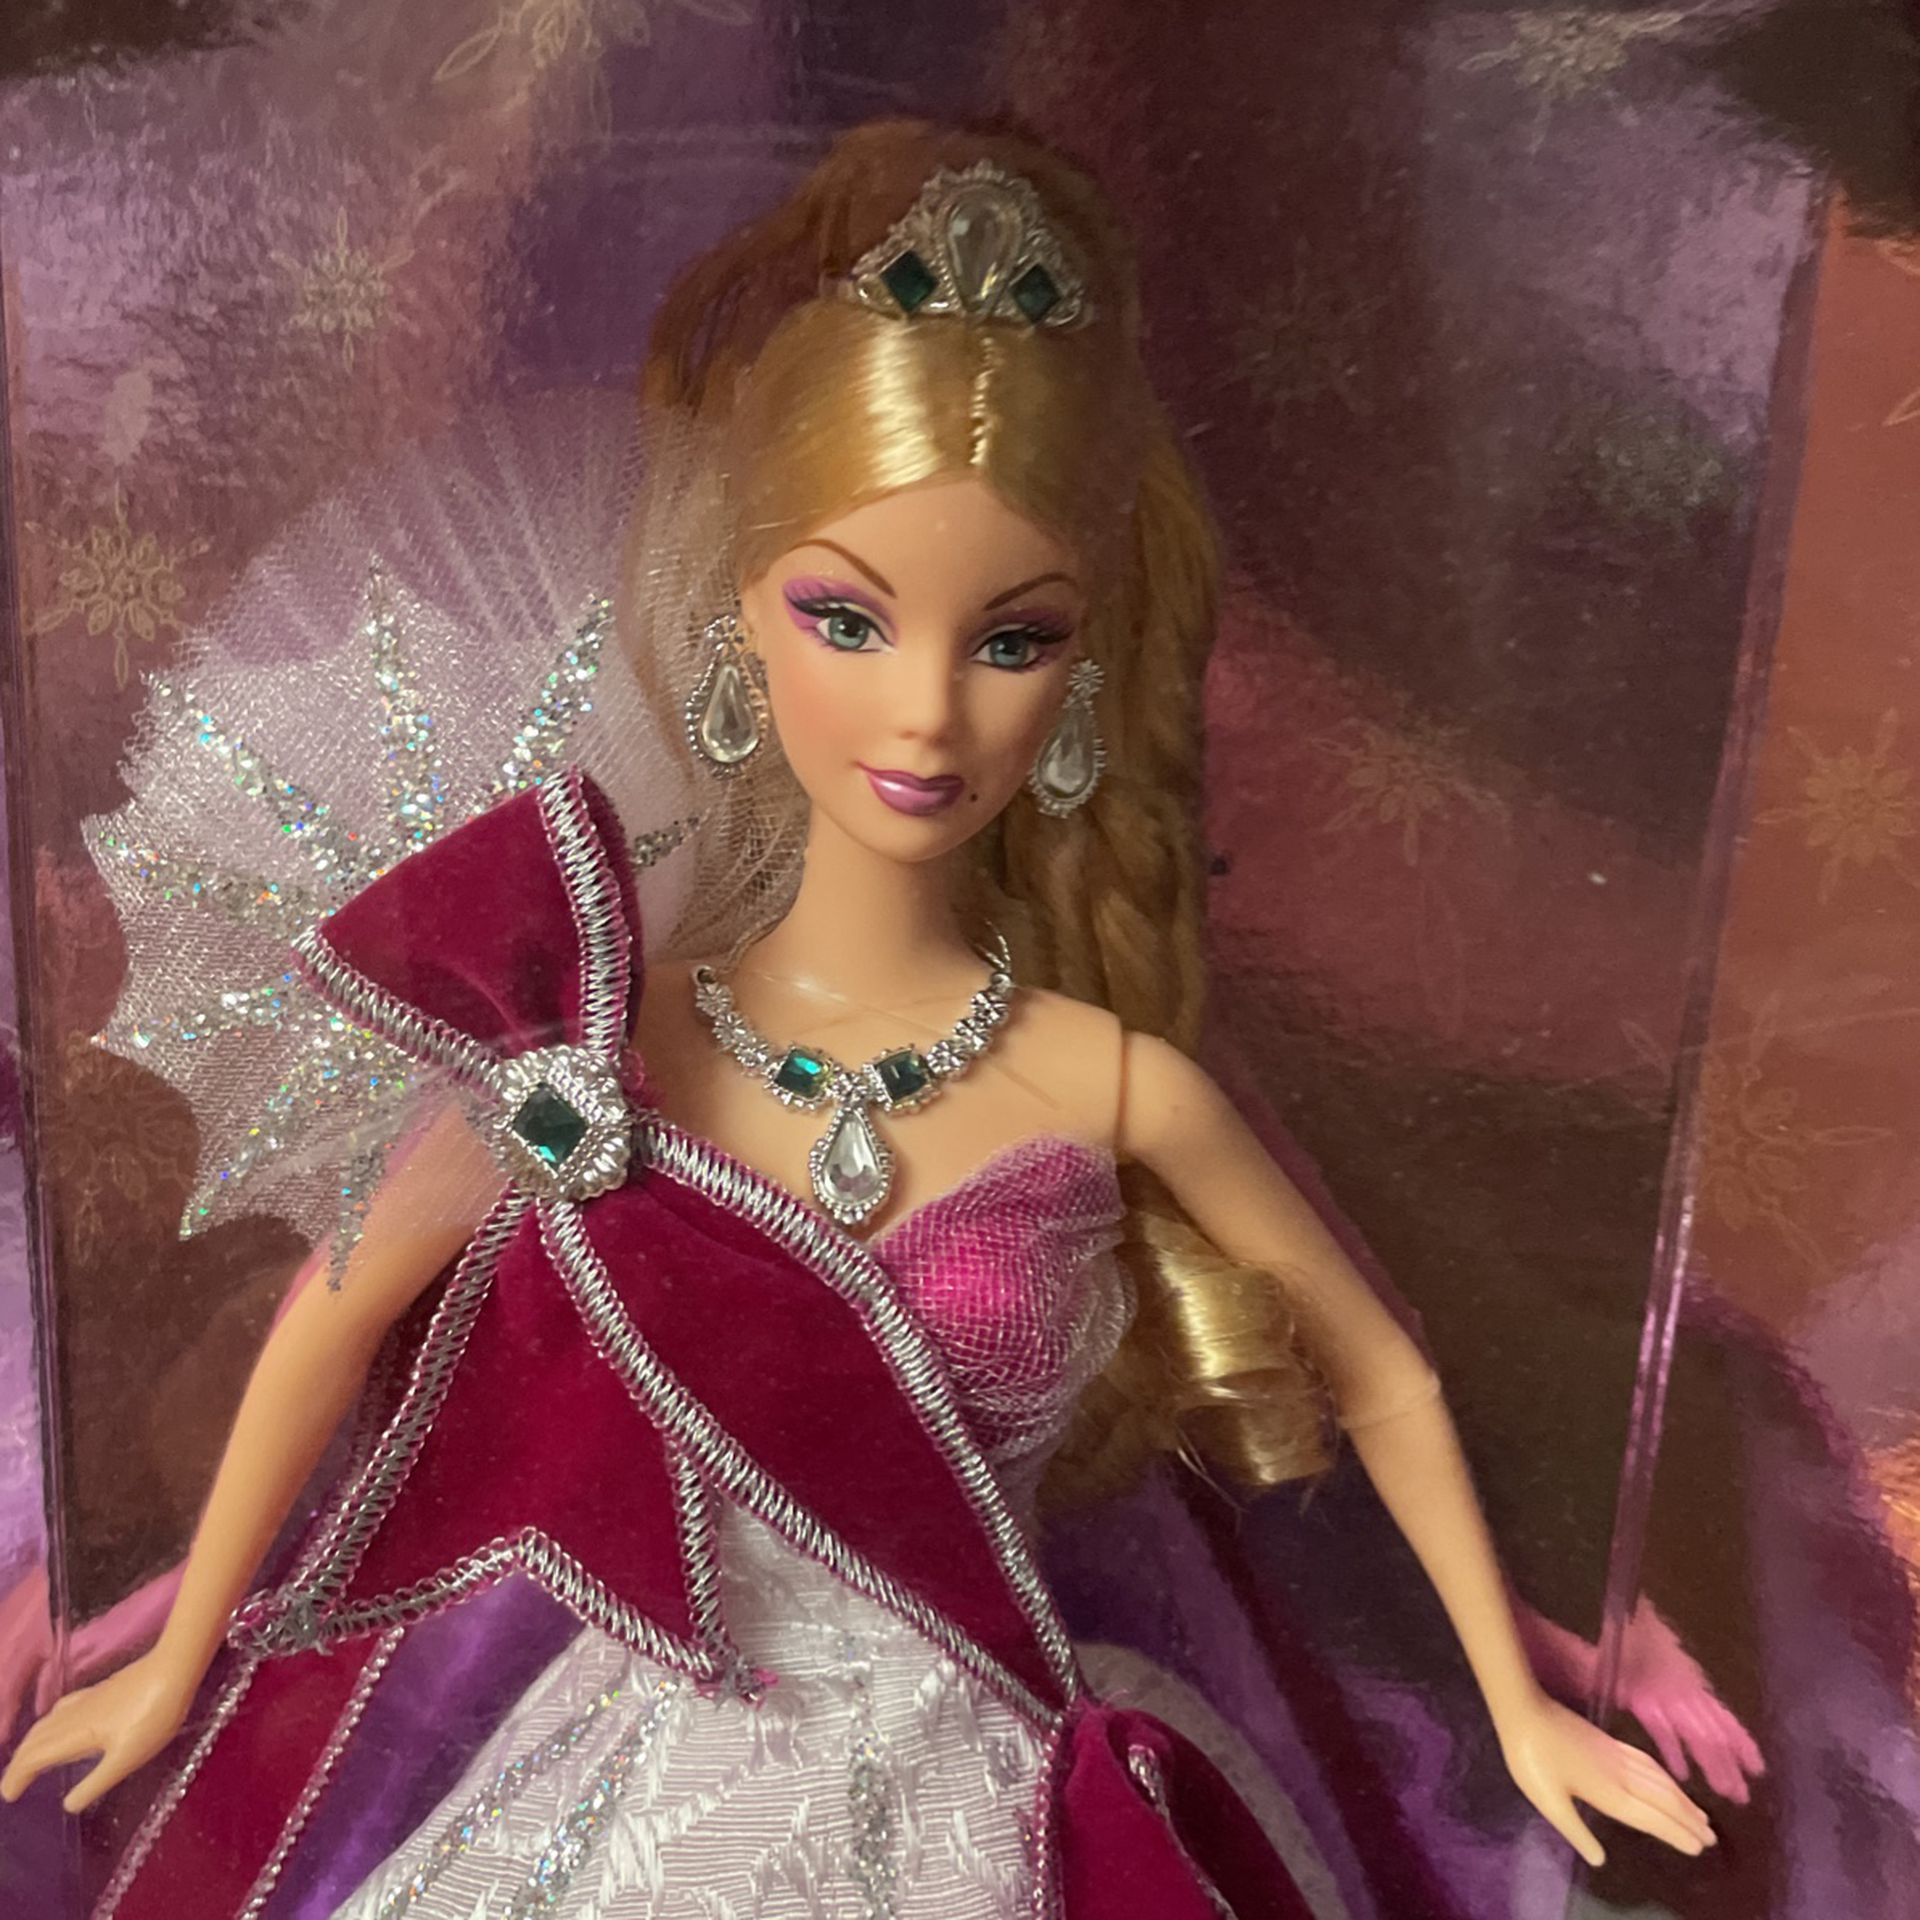 2005 Holiday Barbie By Bob Mackie for Sale in Gig Harbor, WA - OfferUp